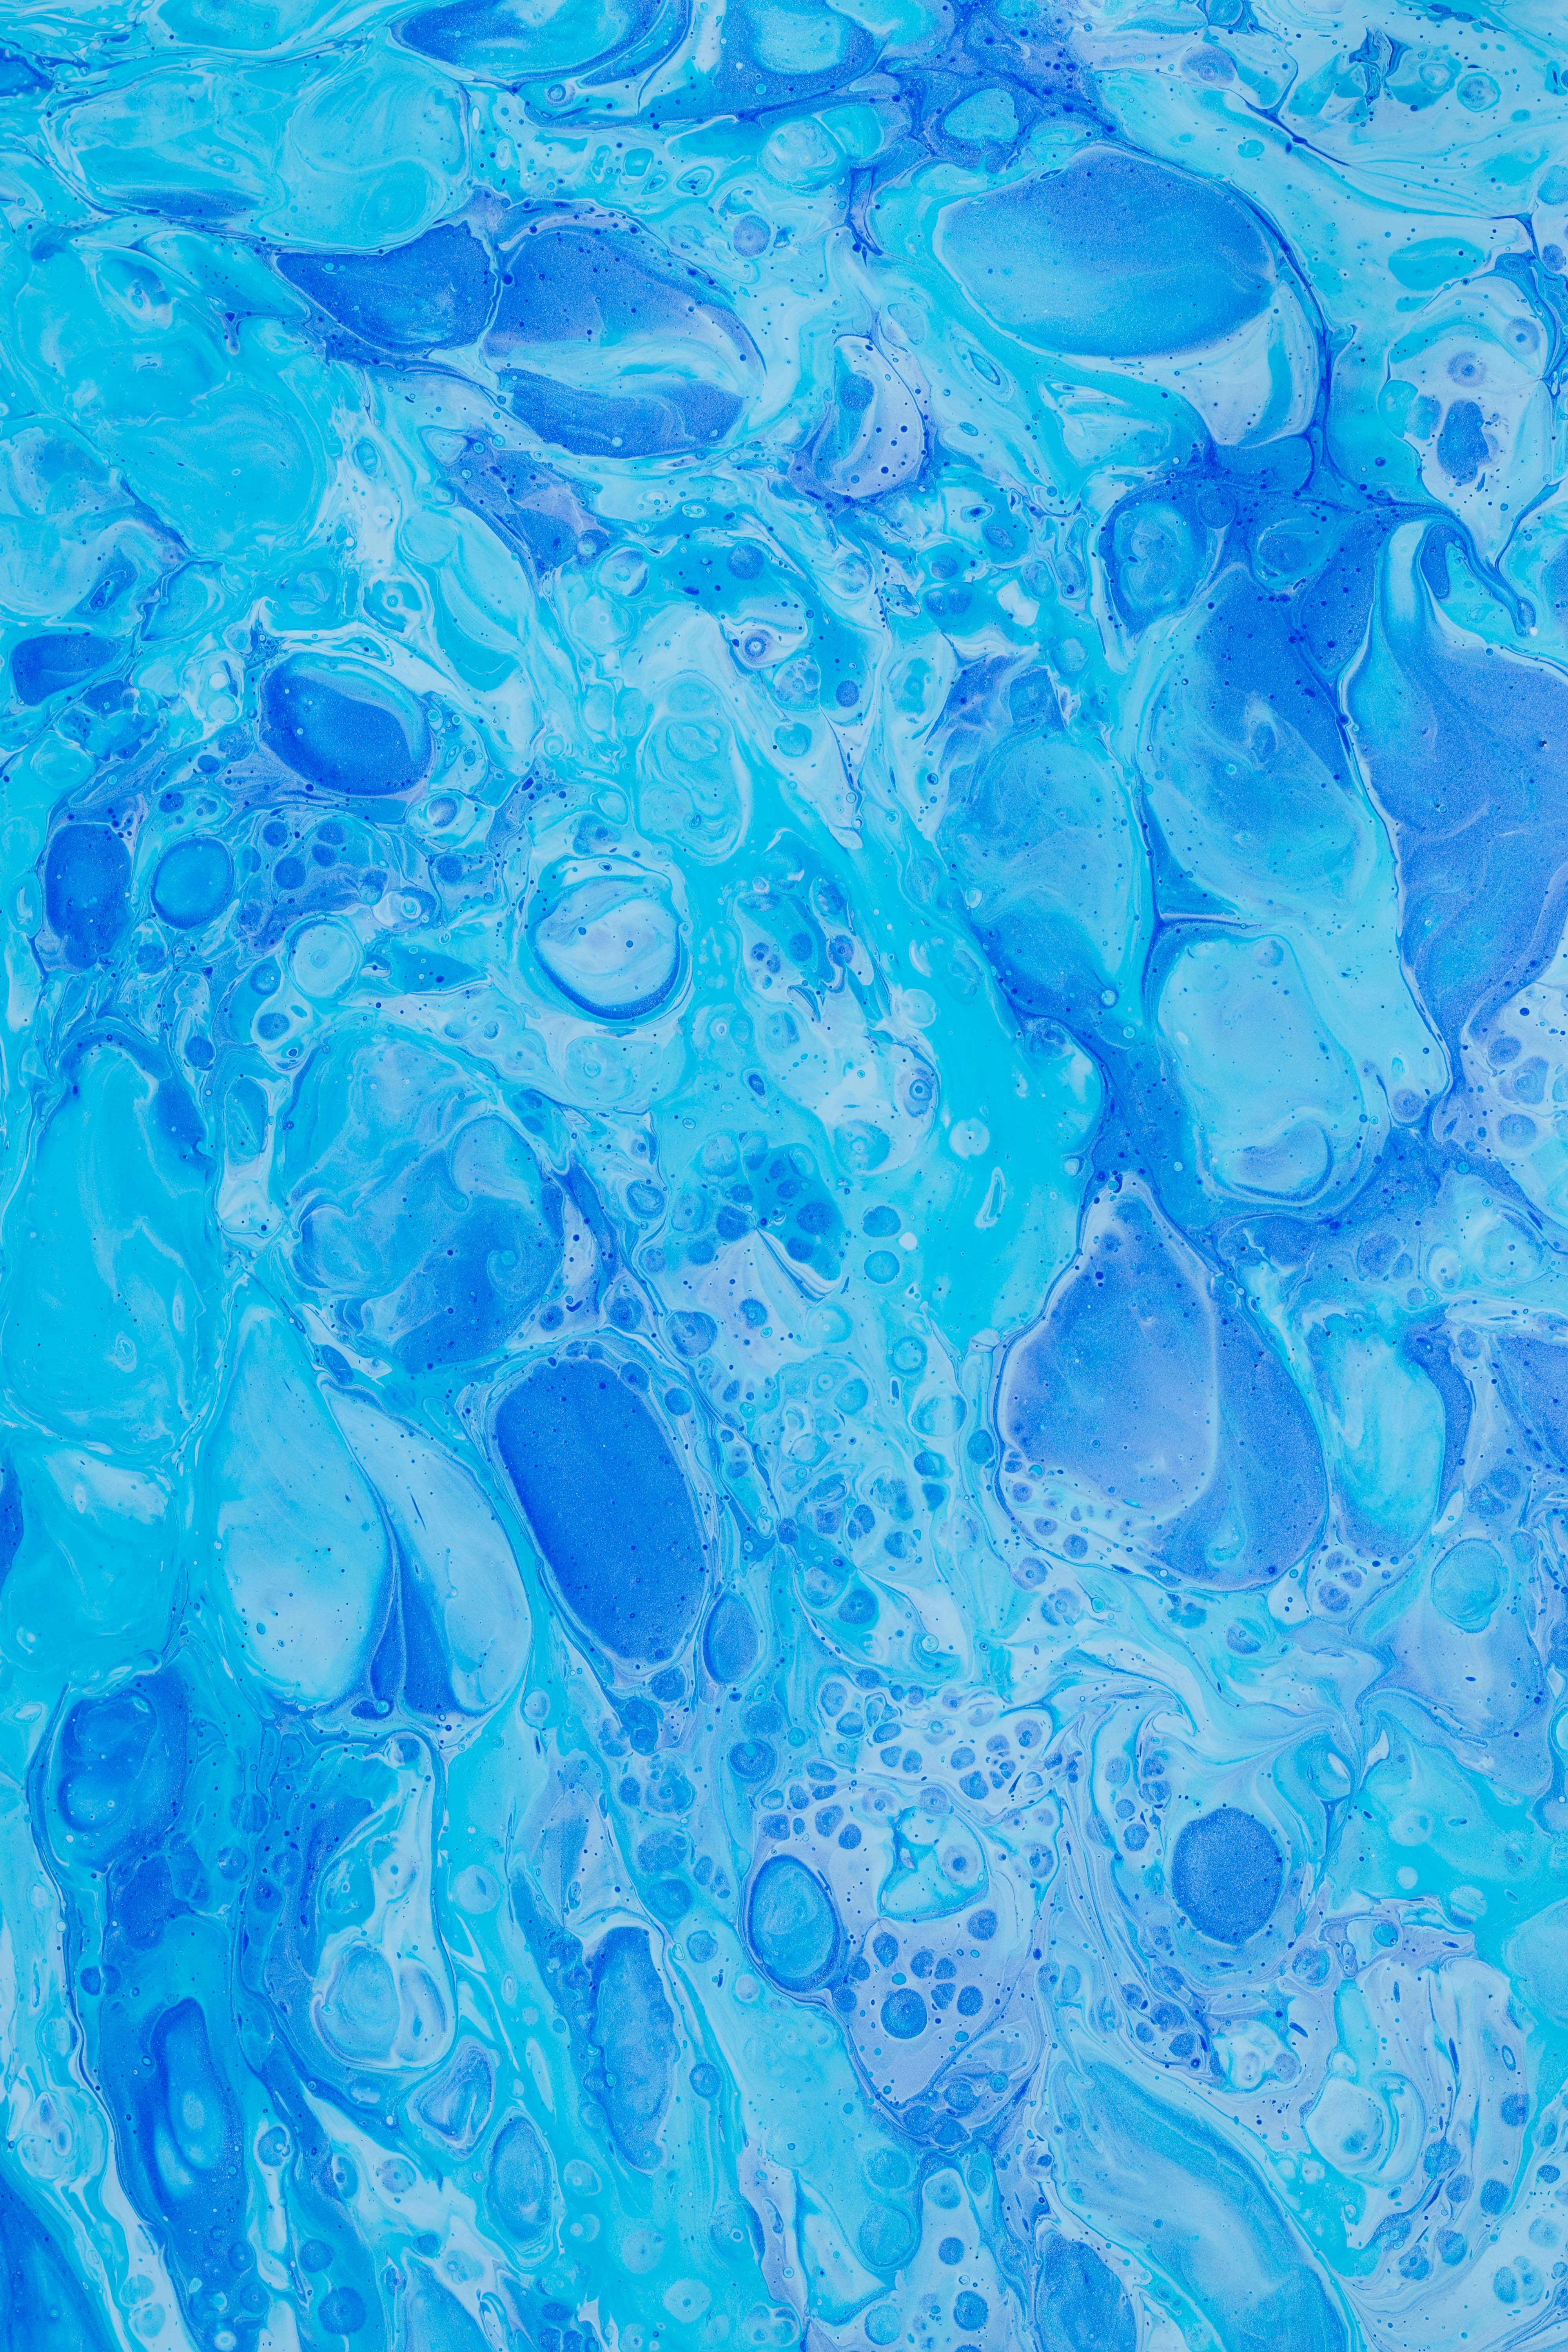 vertical wallpaper watercolor, blue, abstract, paint, stains, spots